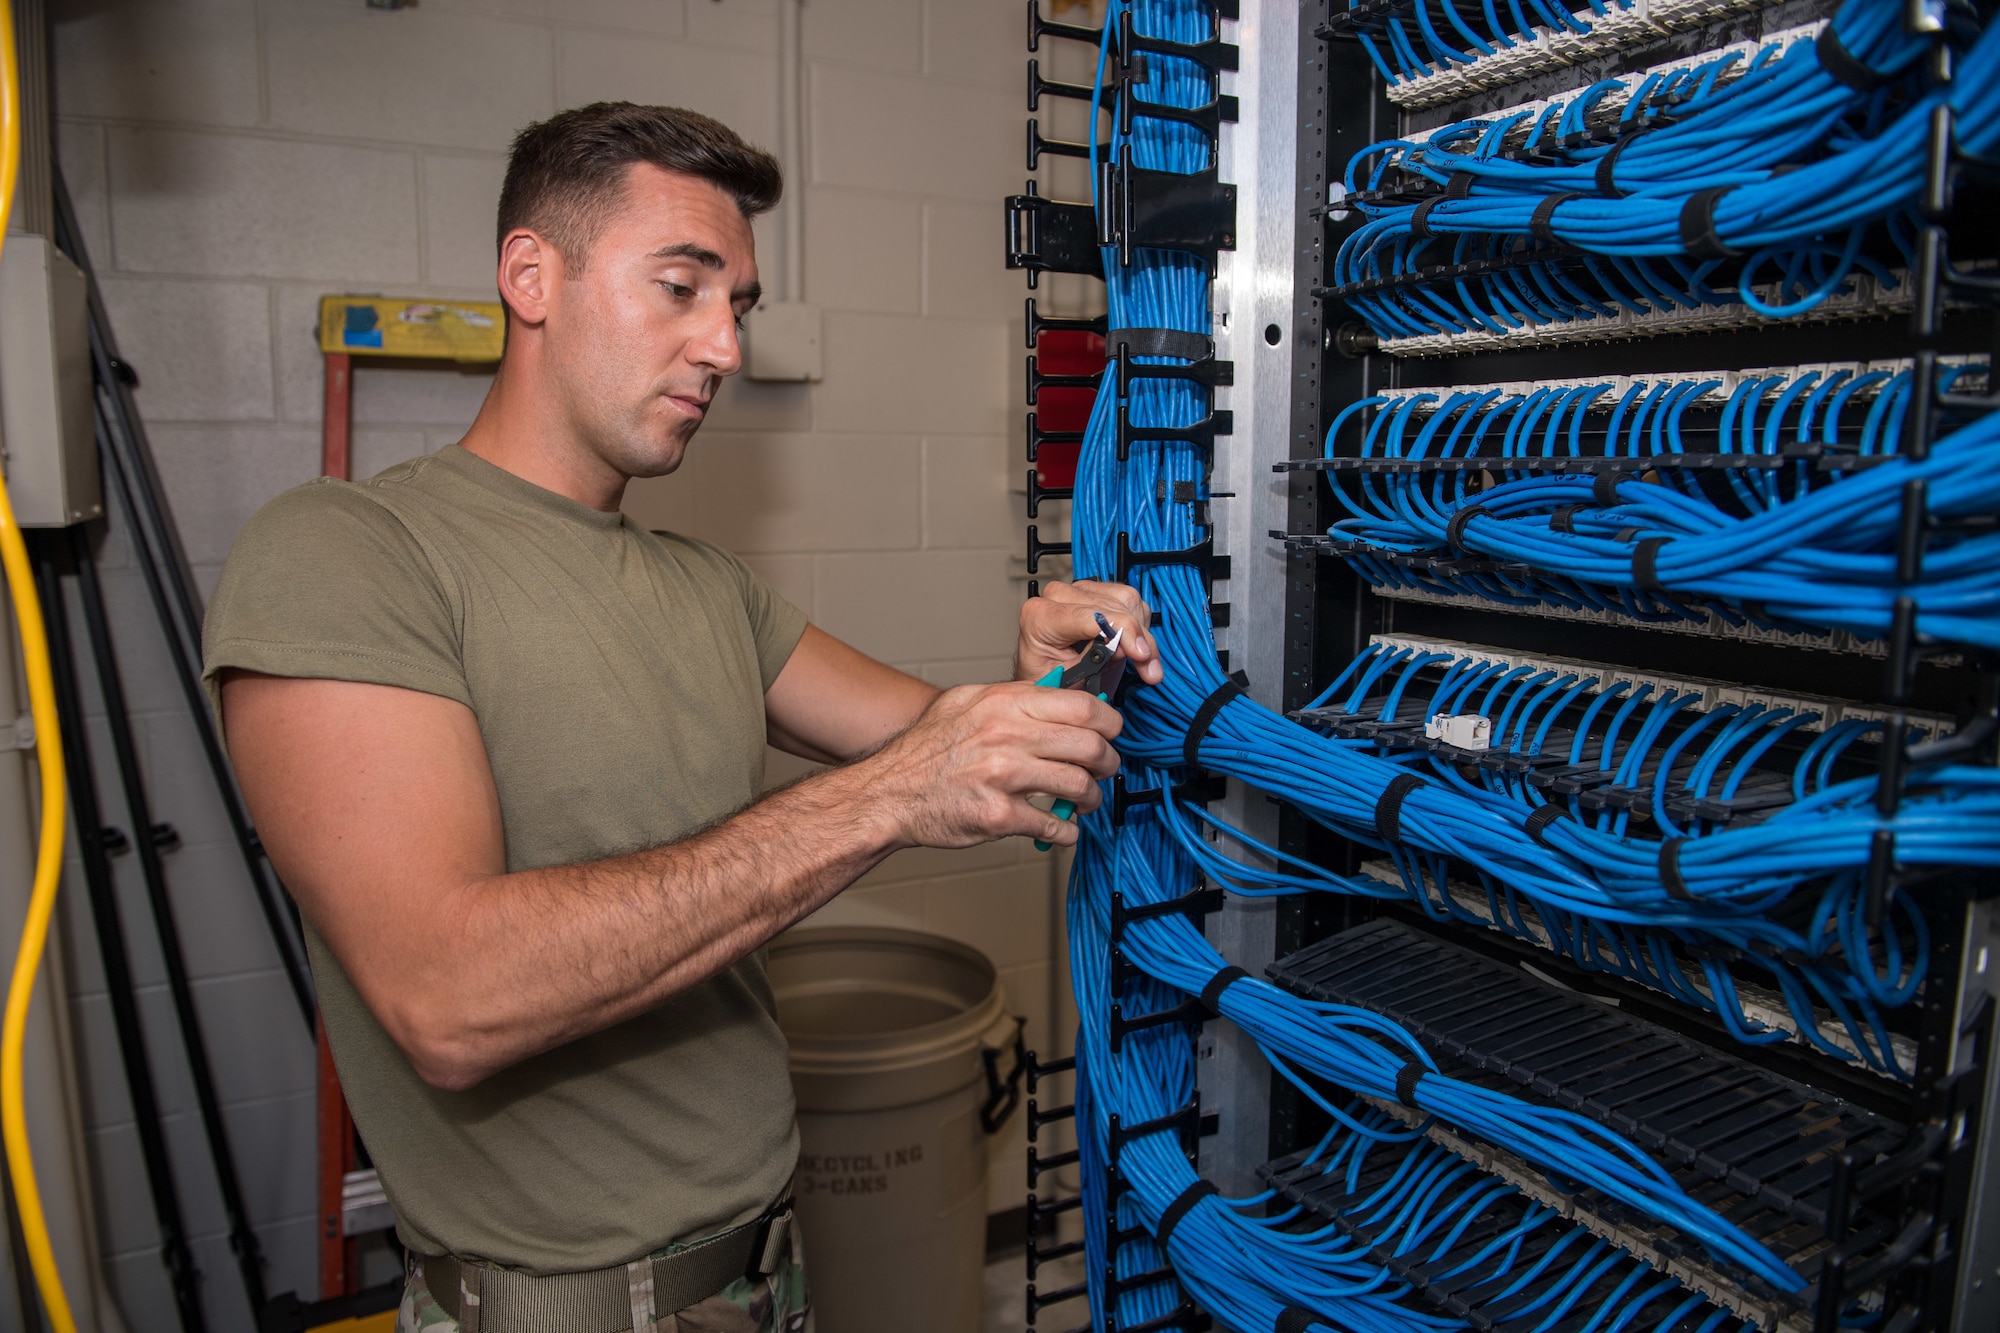 U.S. Air Force Tech. Sgt. Kenneth Overstreet, 178th Communications Squadron client systems from the Ohio Air National Guard, cuts a cable at Tyndall Air Force Base, Florida, June 18, 2019.